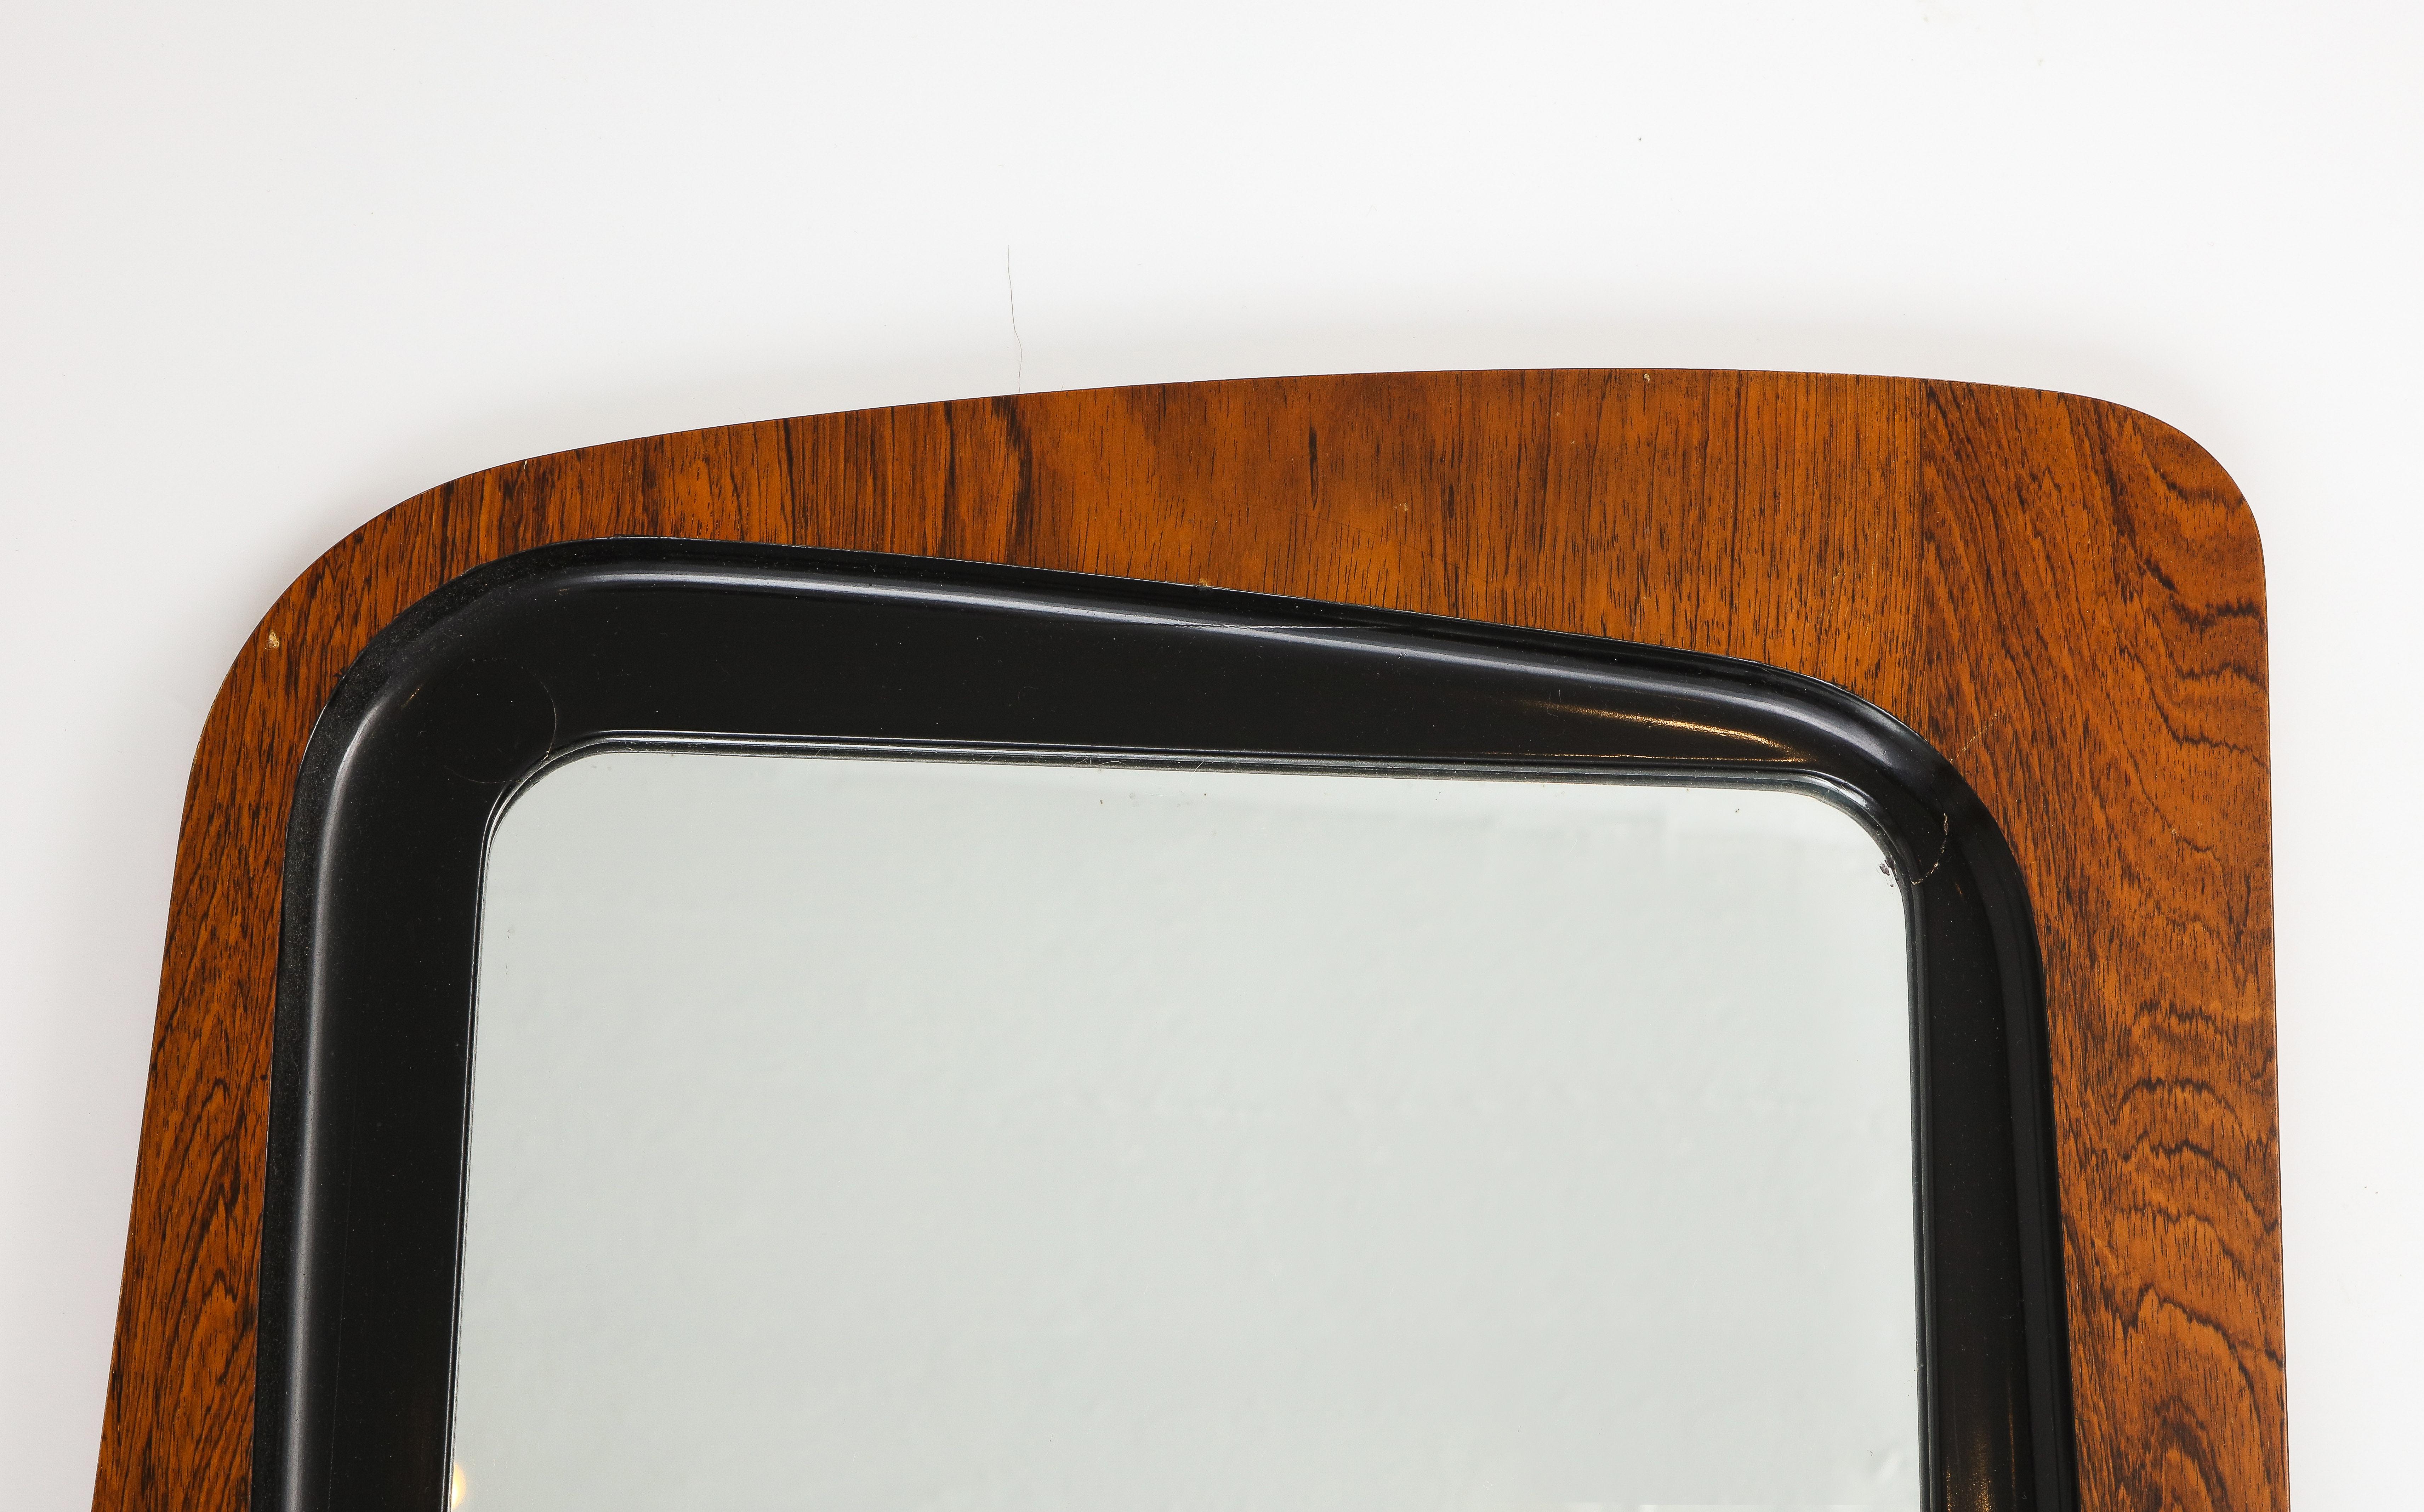 A rosewood, black-painted wood and glass wall mirror designed and produced by Glas & Trä, Hovmantorp, Sweden, 1950s. 

Some loss, requires restoration to improve condition. 